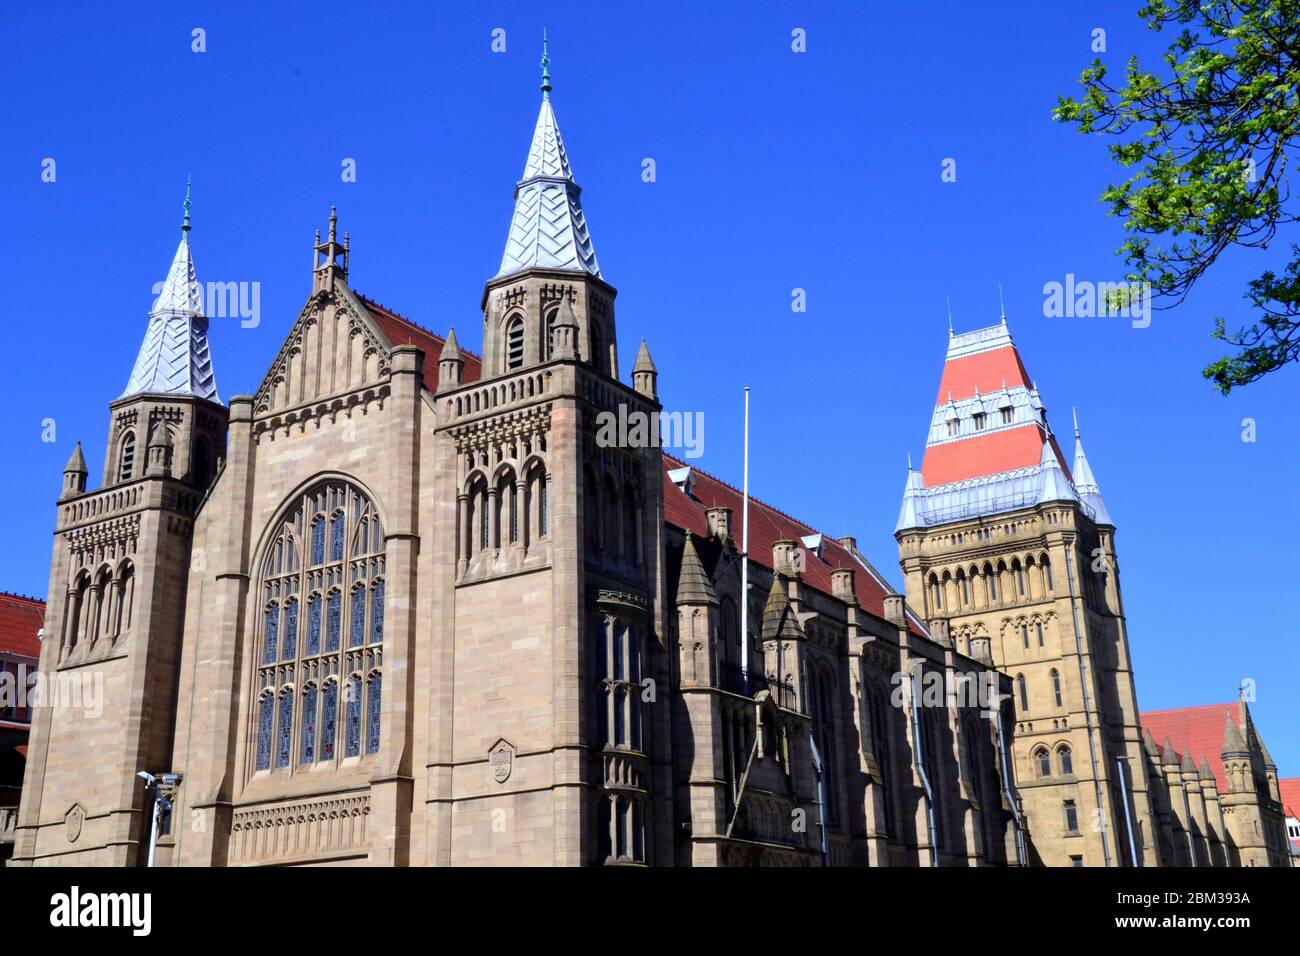 Whitworth Hall, at the University of Manchester, Manchester, England, uk. The ceremonial Whitworth Hall was built between 1898 and 1902. Stock Photo